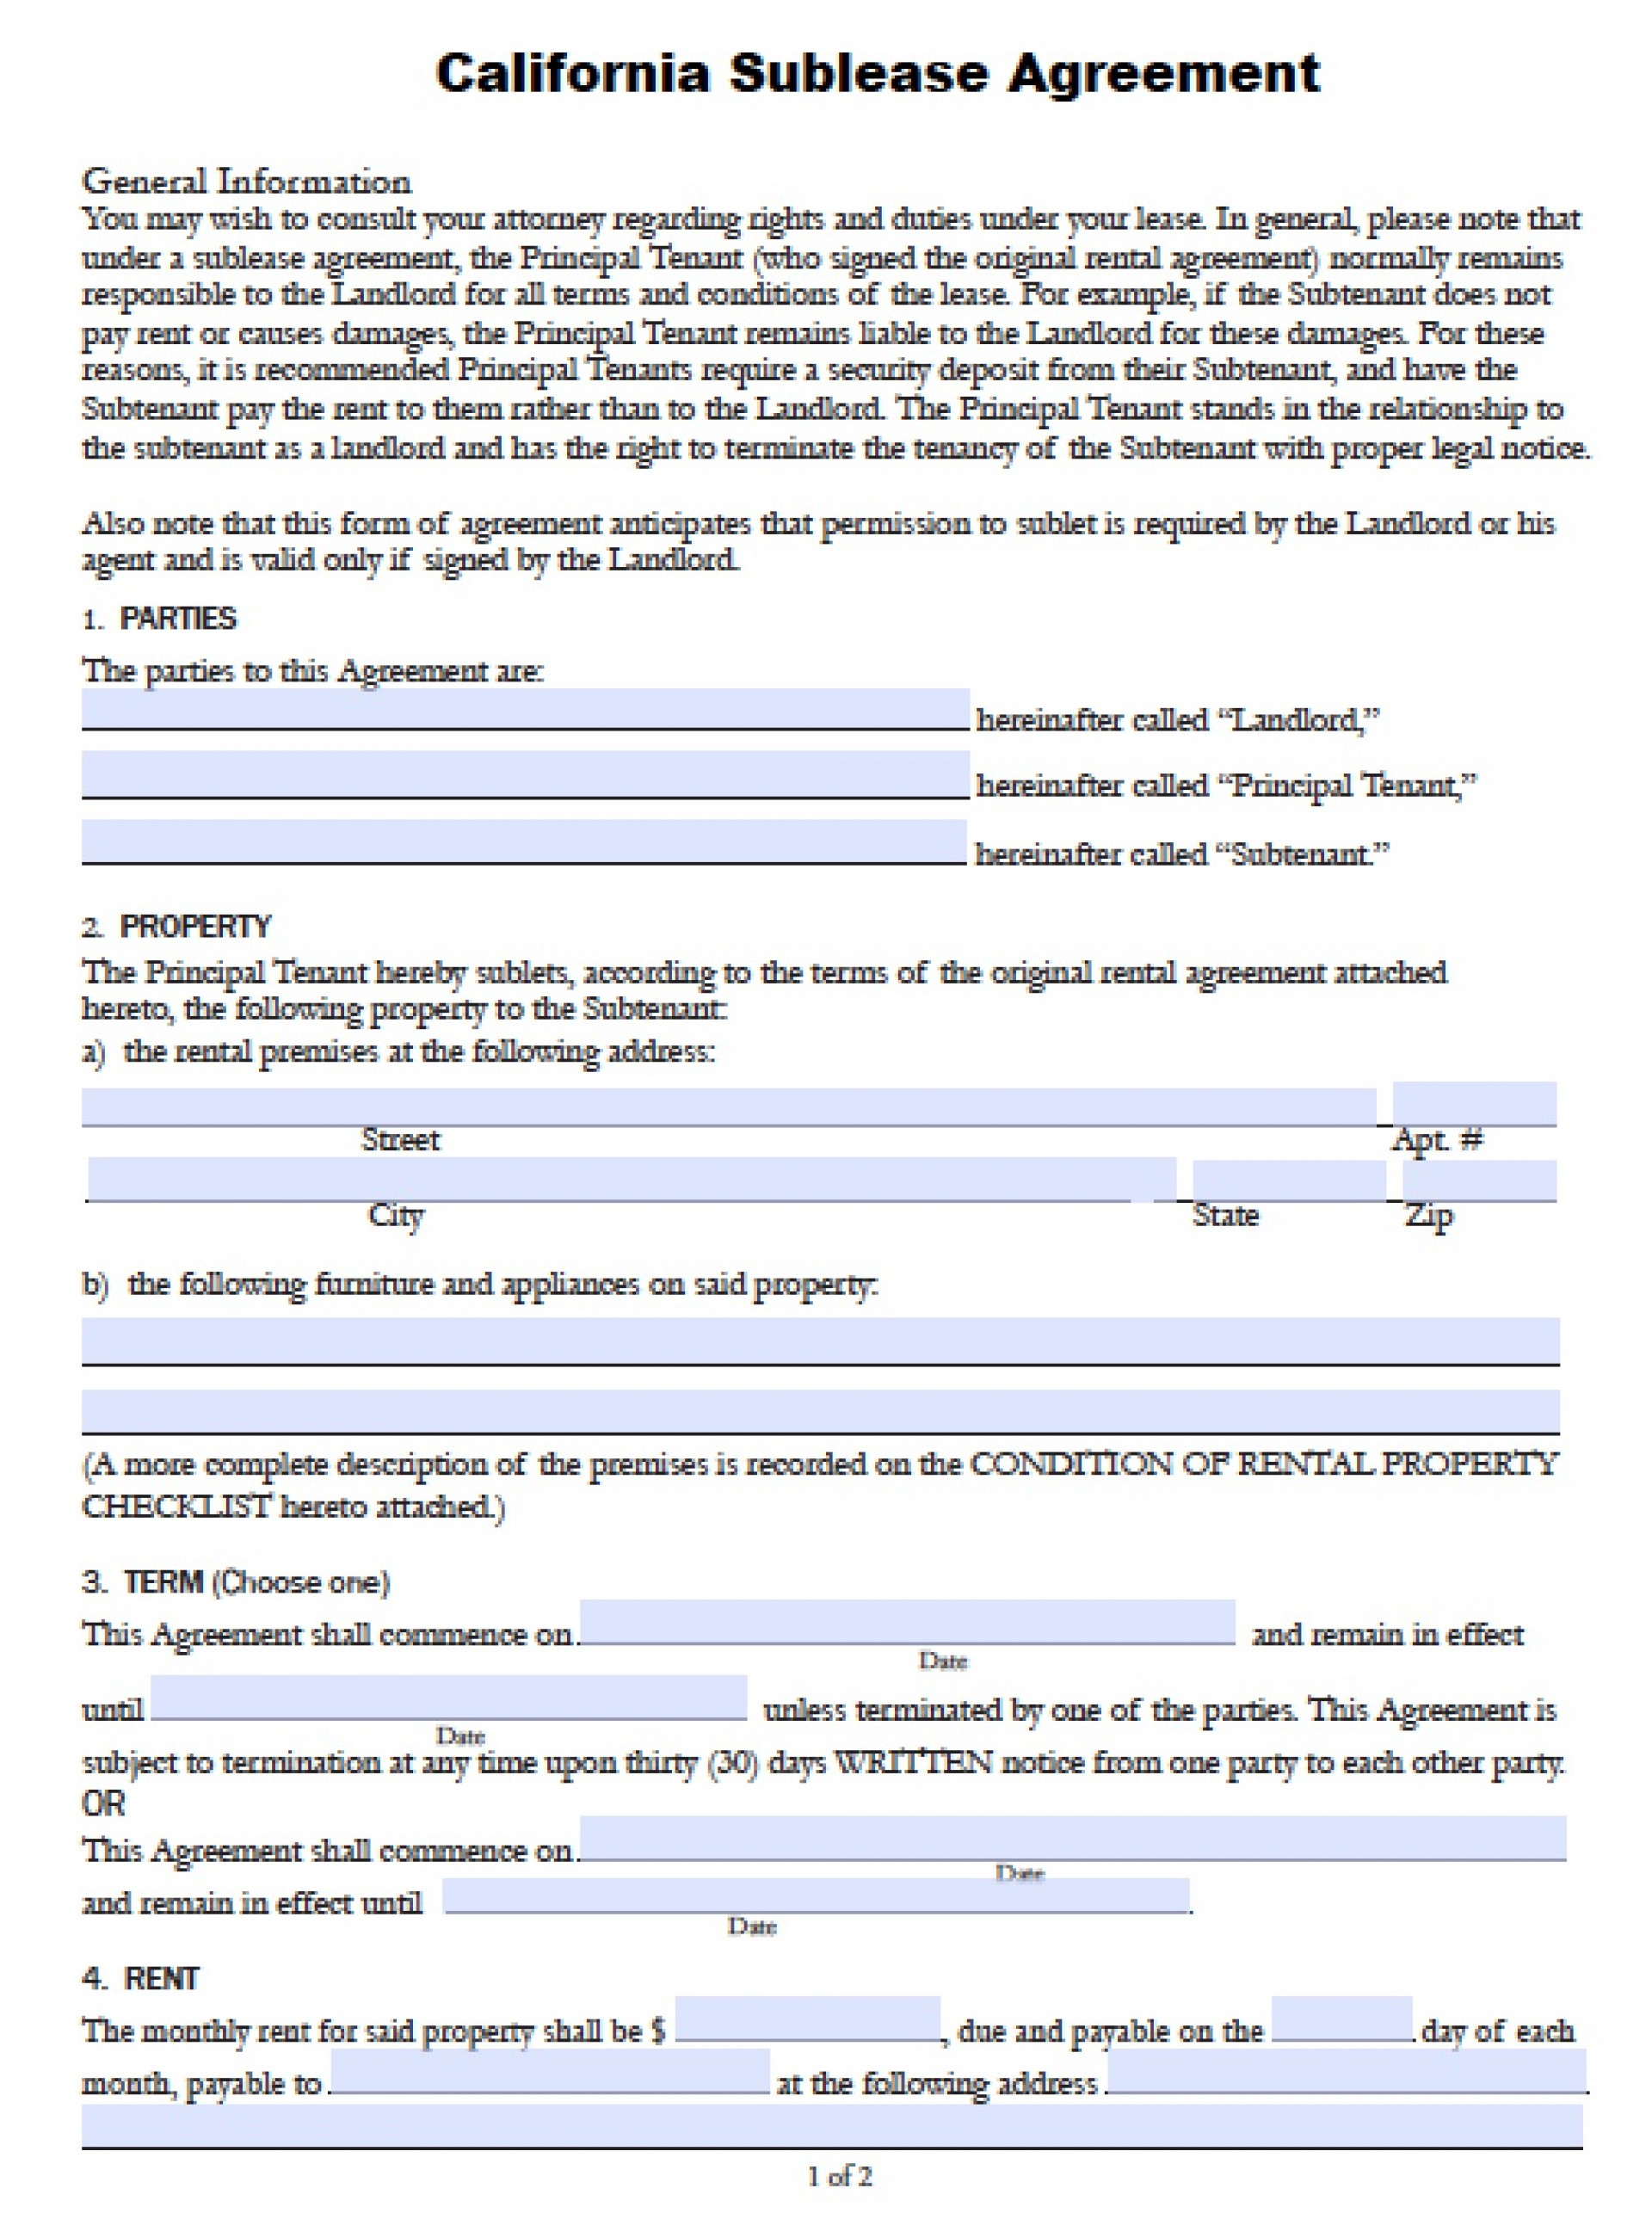 San Francisco Lease Agreement 022 Sublease Agreement Template Word Ideas San Francisco Best Of How